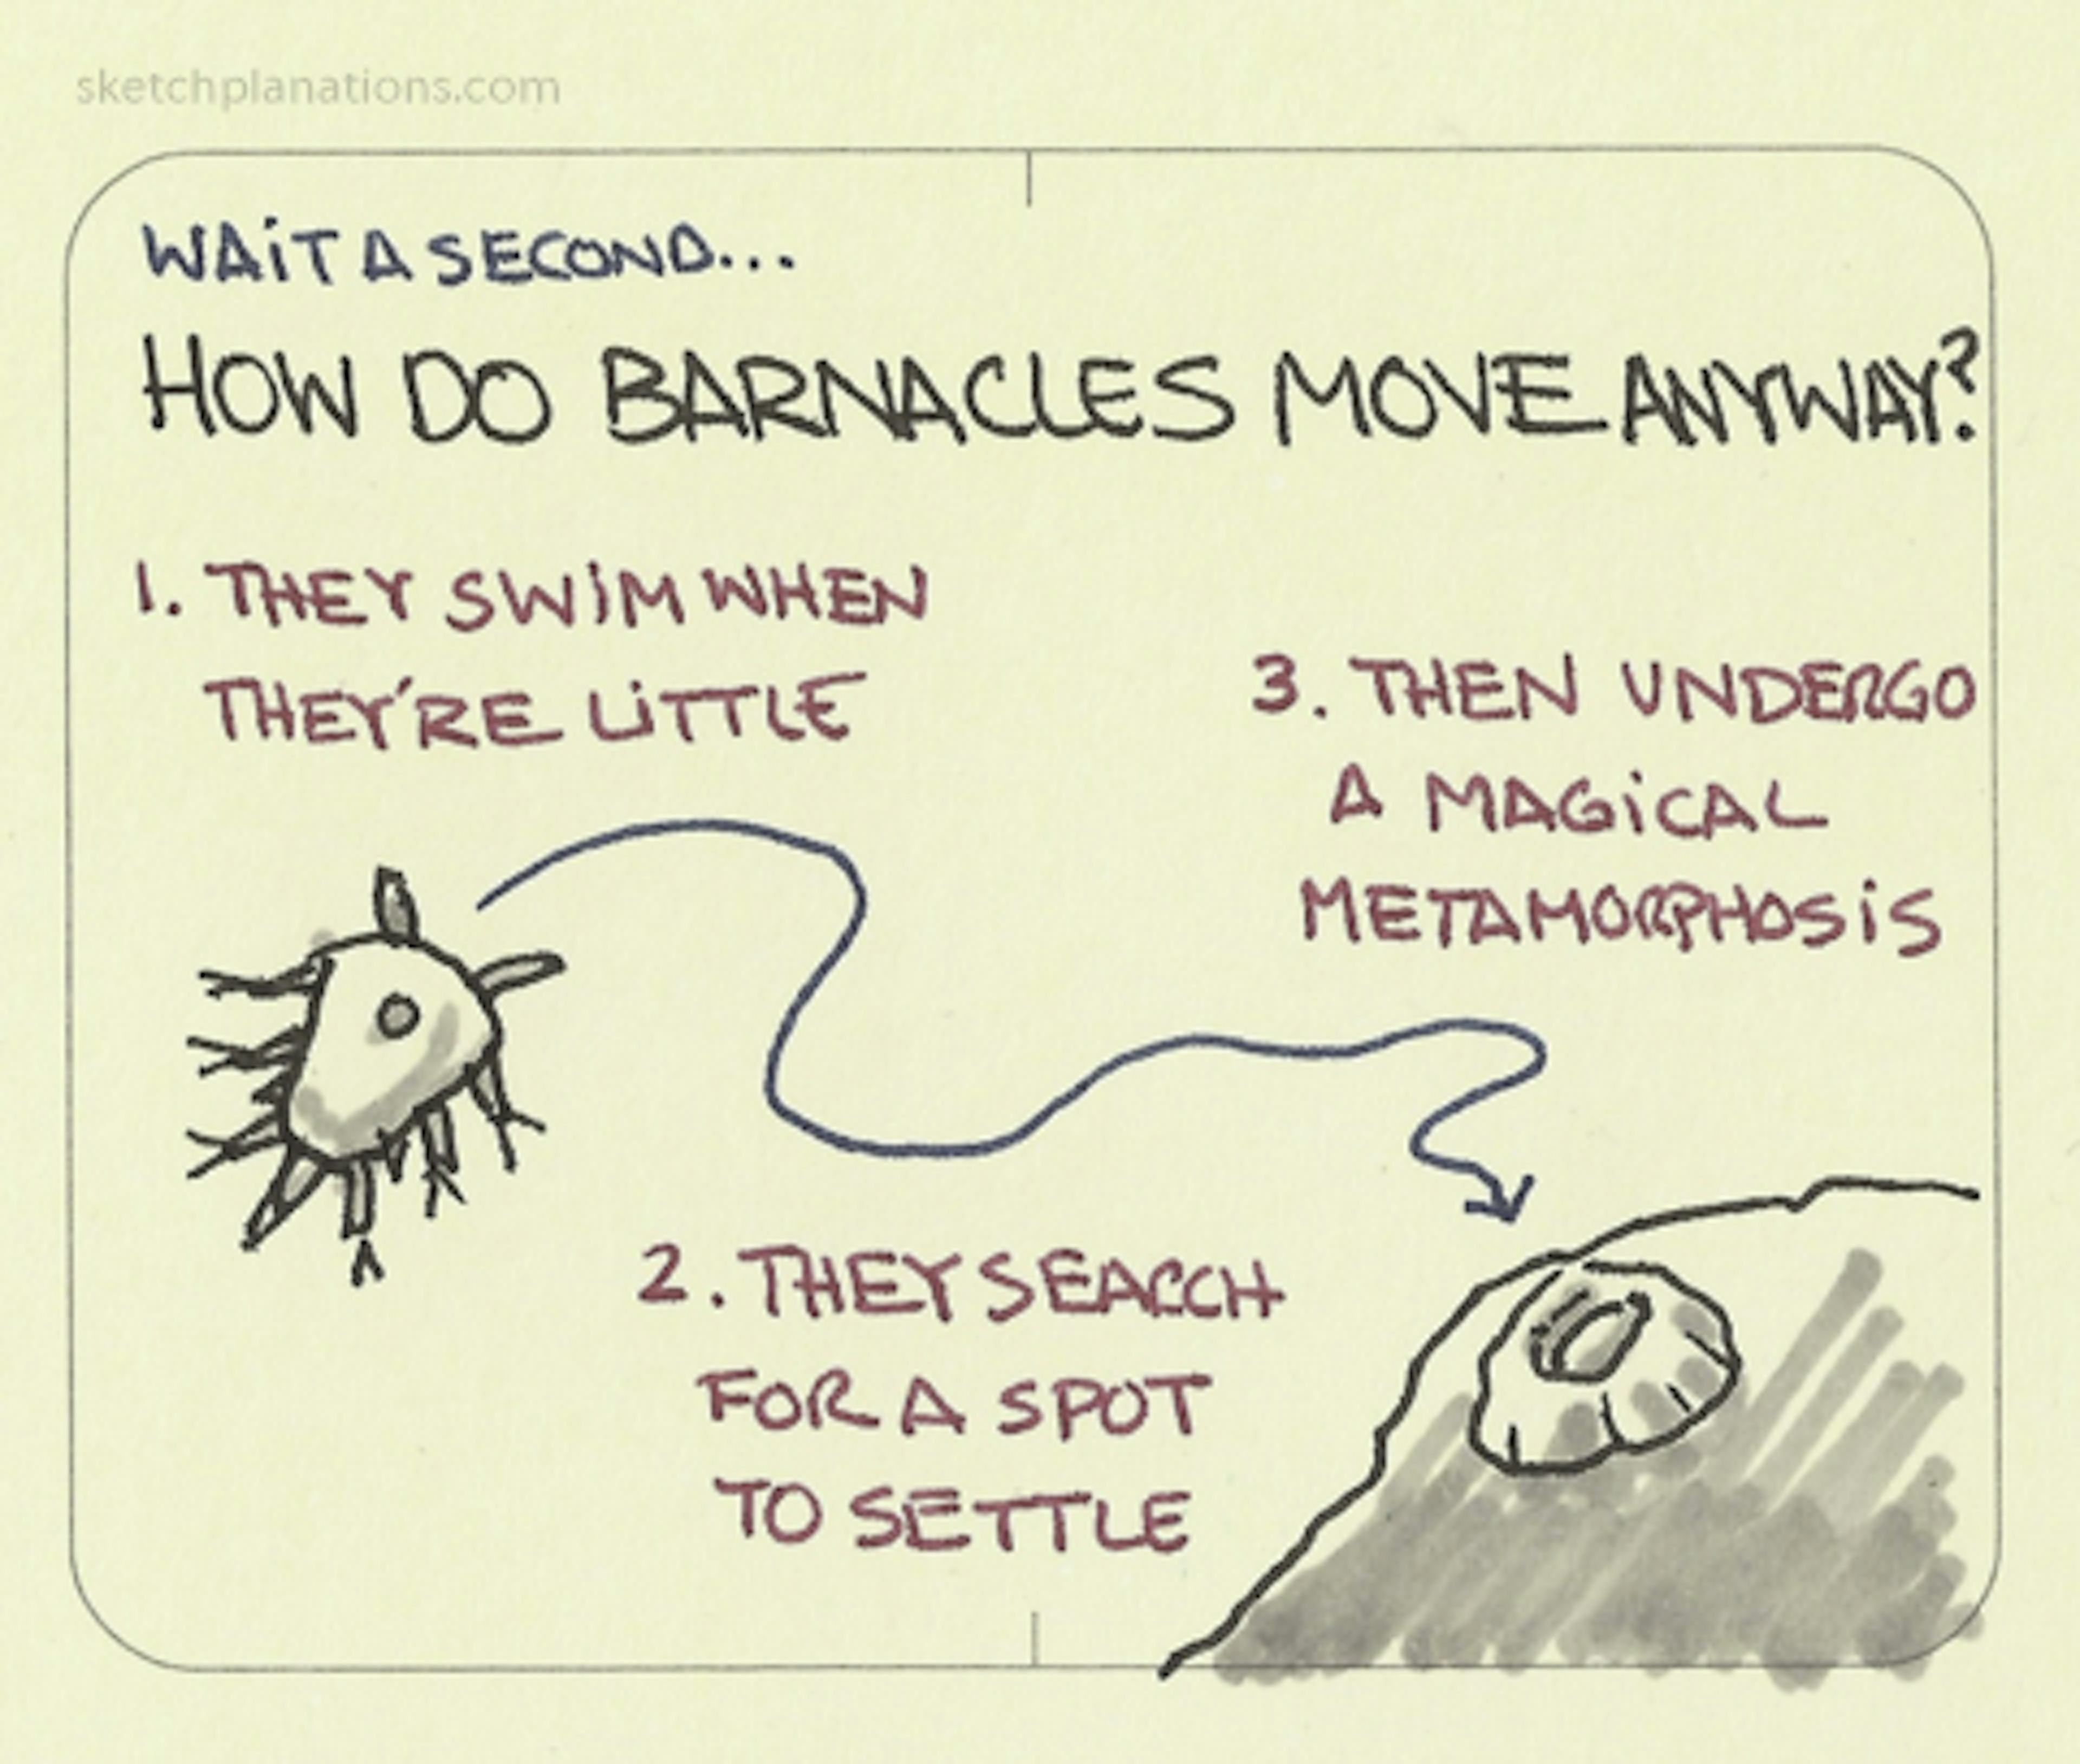 How do barnacles move